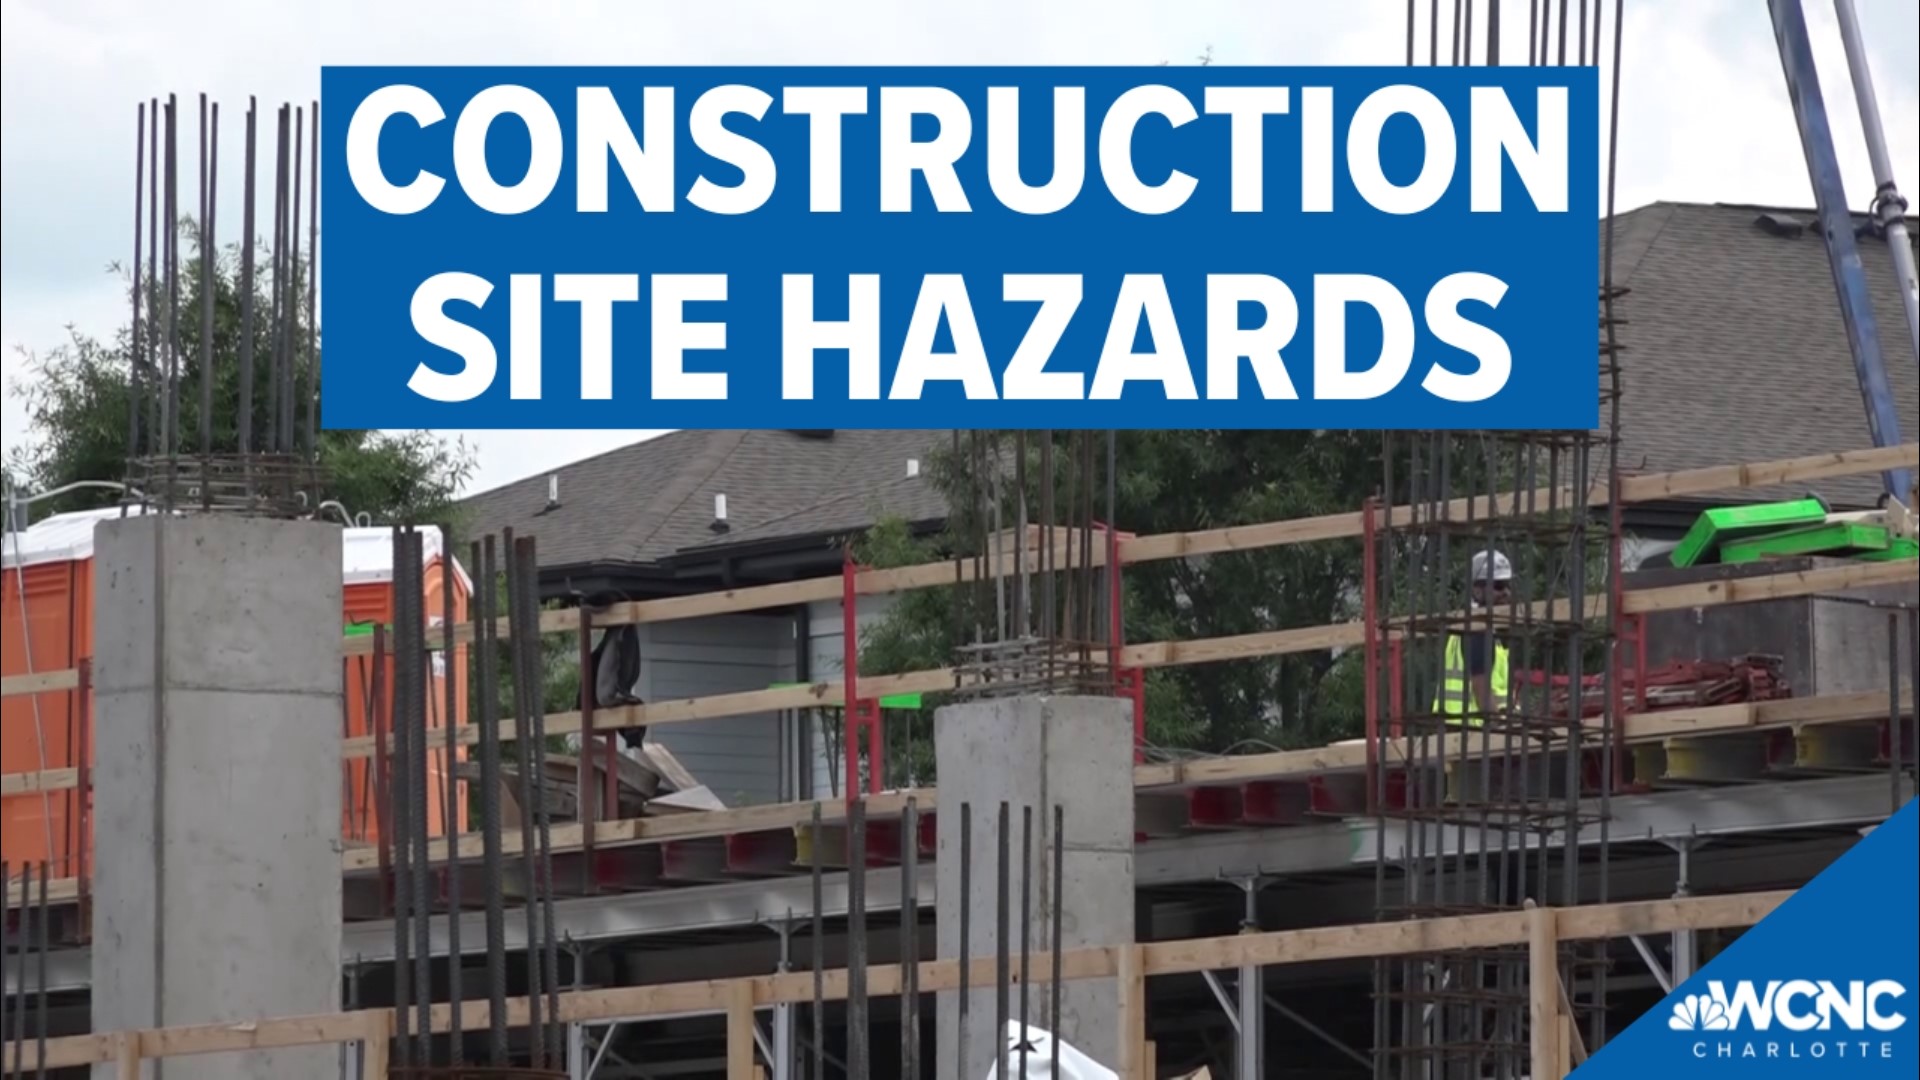 Construction work presents some of the most hazardous conditions of any industry, mostly impacting the Latino community.